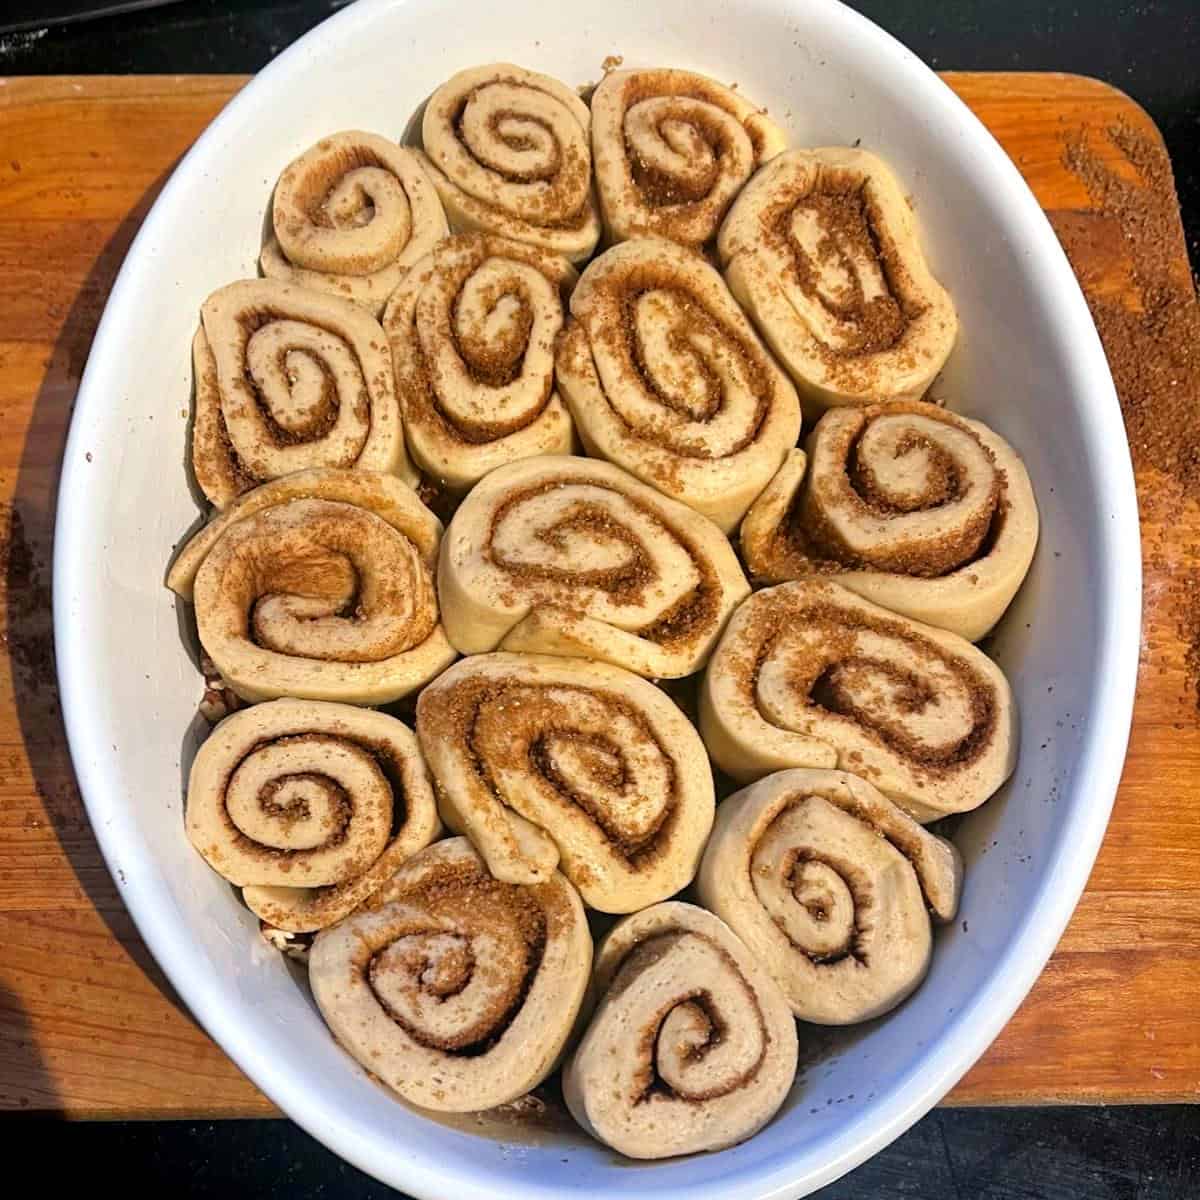 Sourdough sticky buns in oval baking dish.